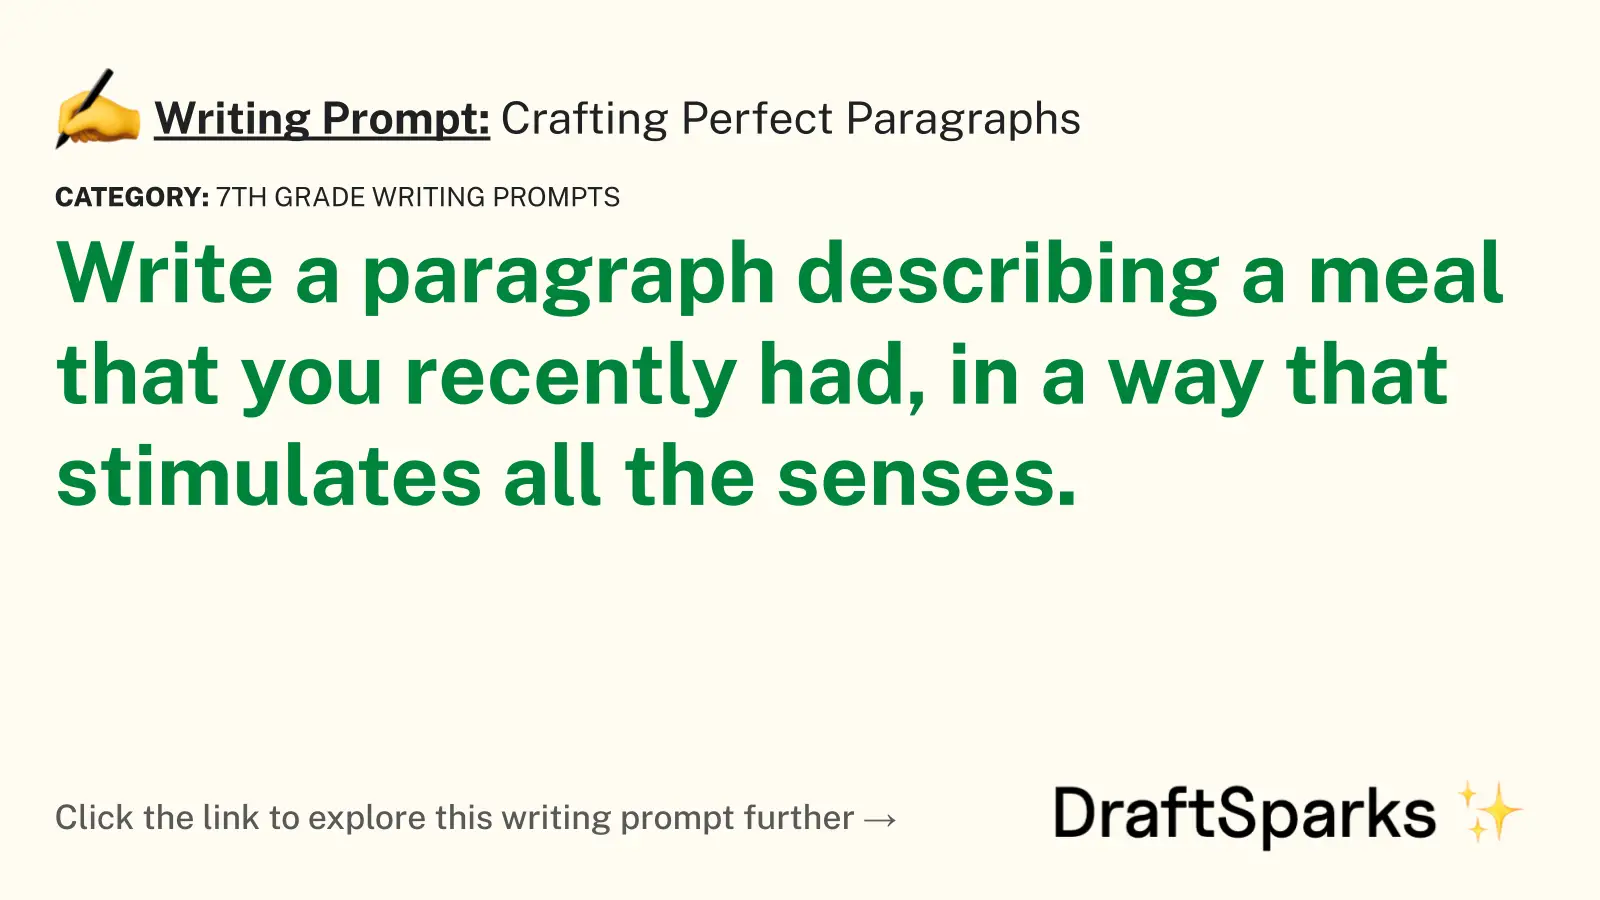 Crafting Perfect Paragraphs